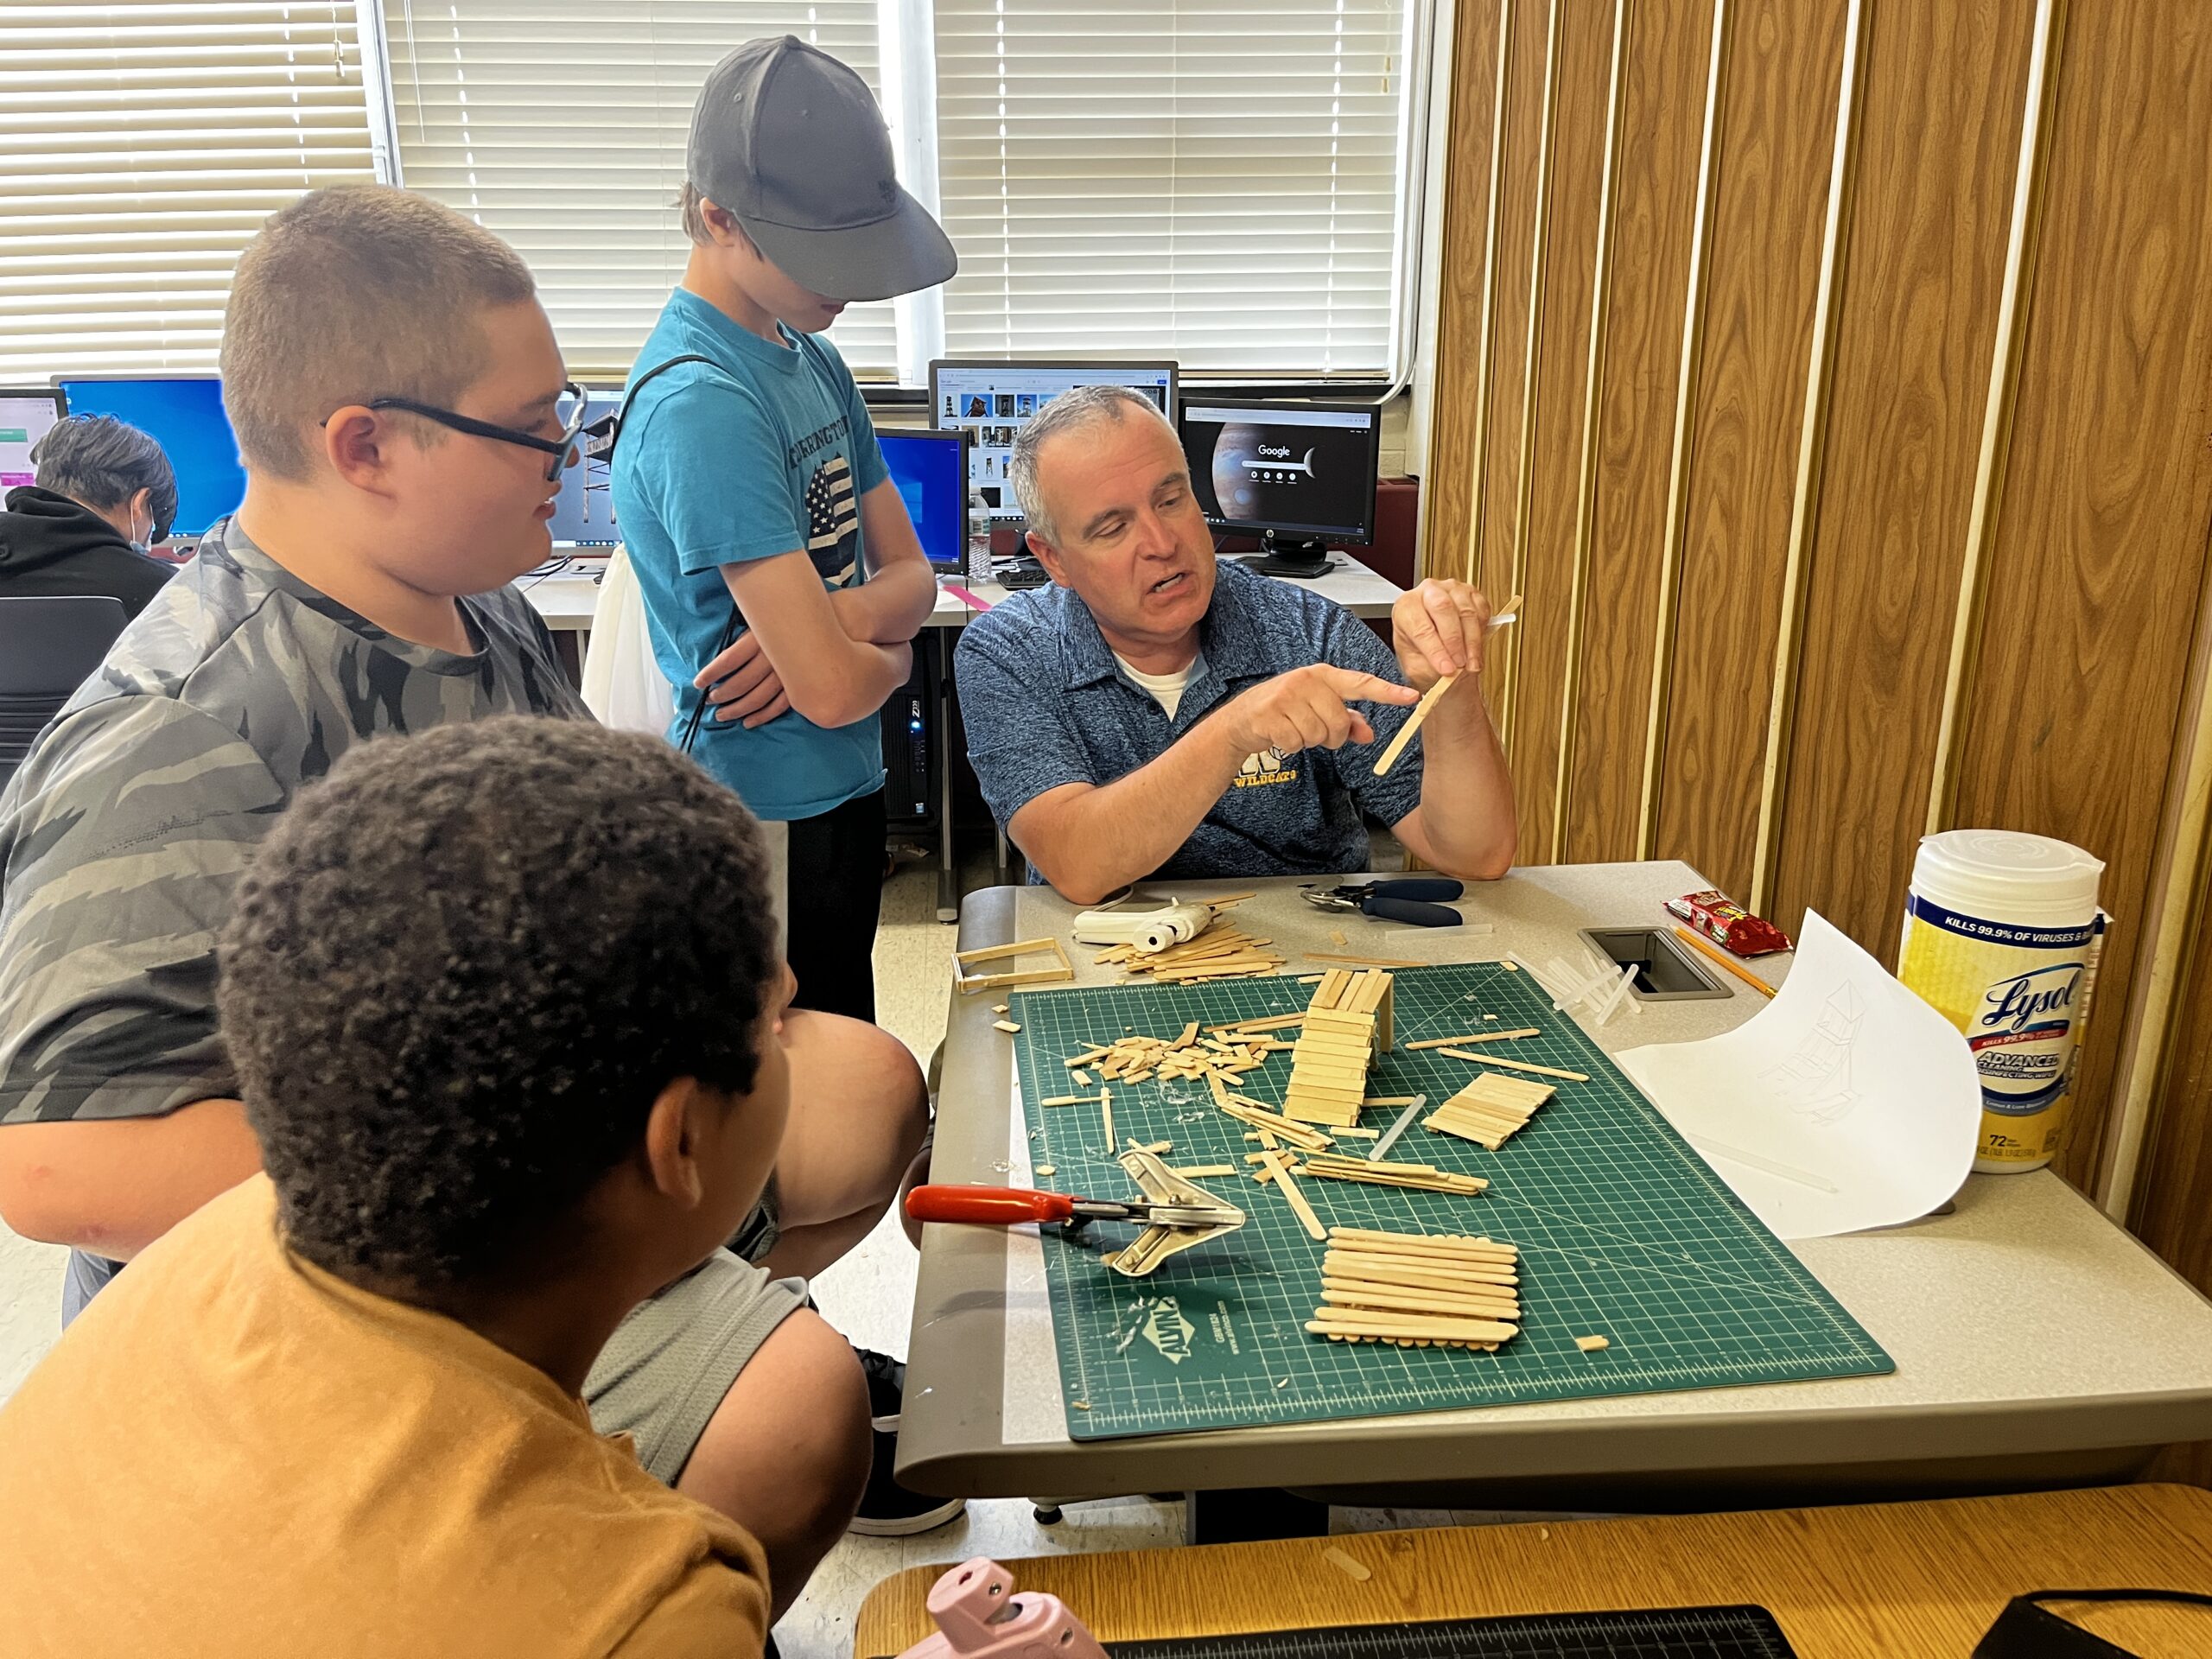 MDET Department Head Ray Tanguay assisting PAL Program students in their build.